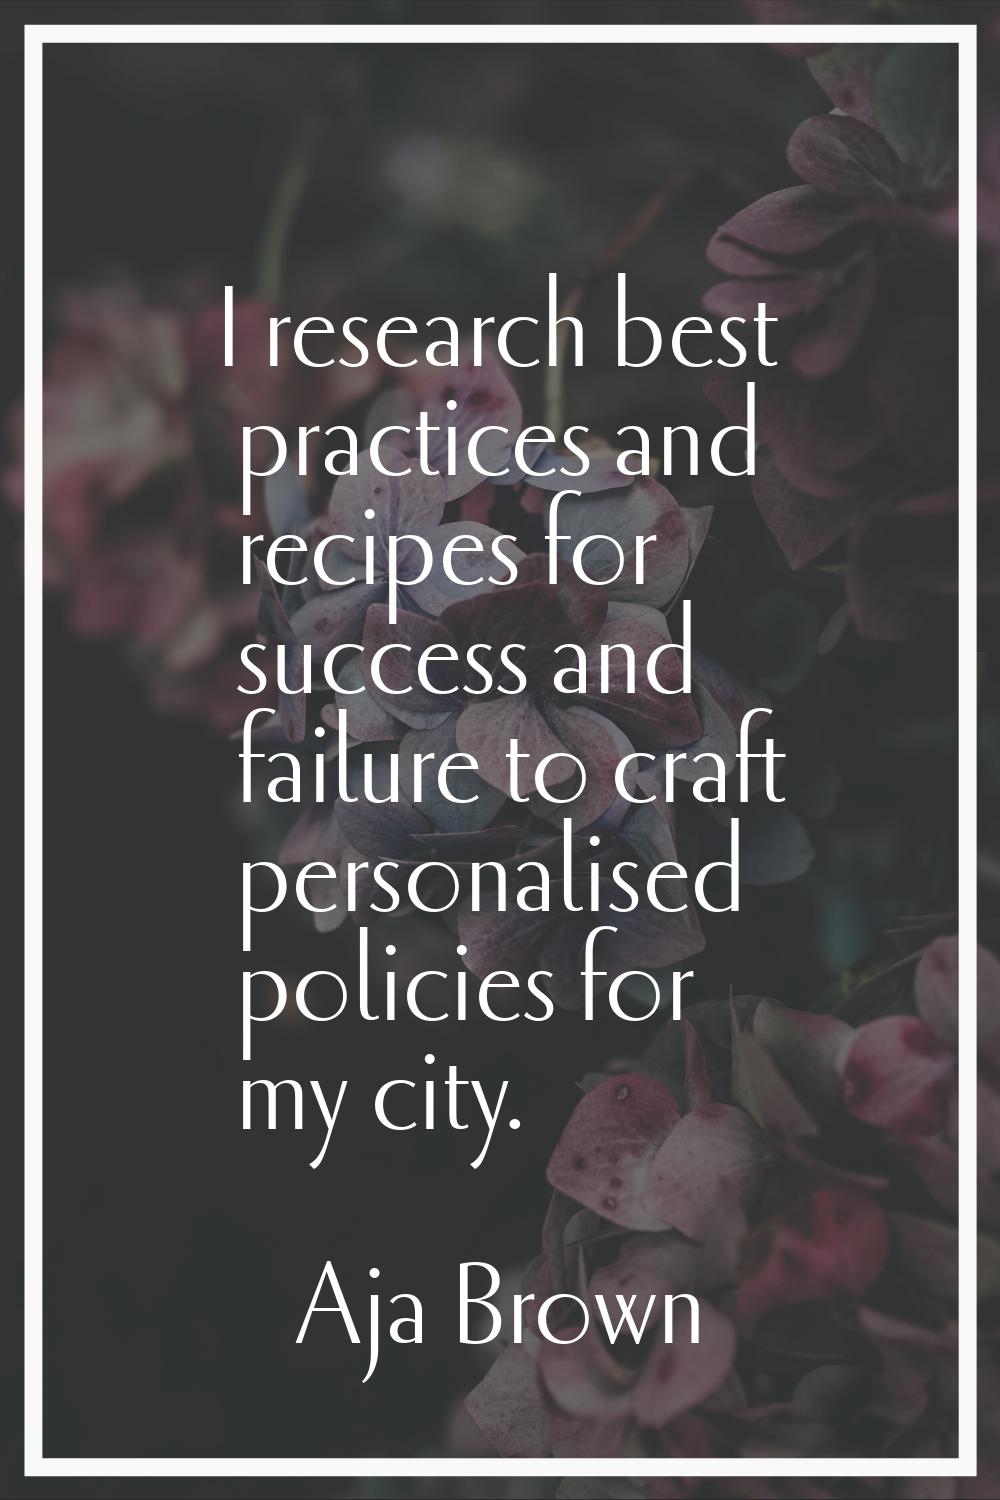 I research best practices and recipes for success and failure to craft personalised policies for my